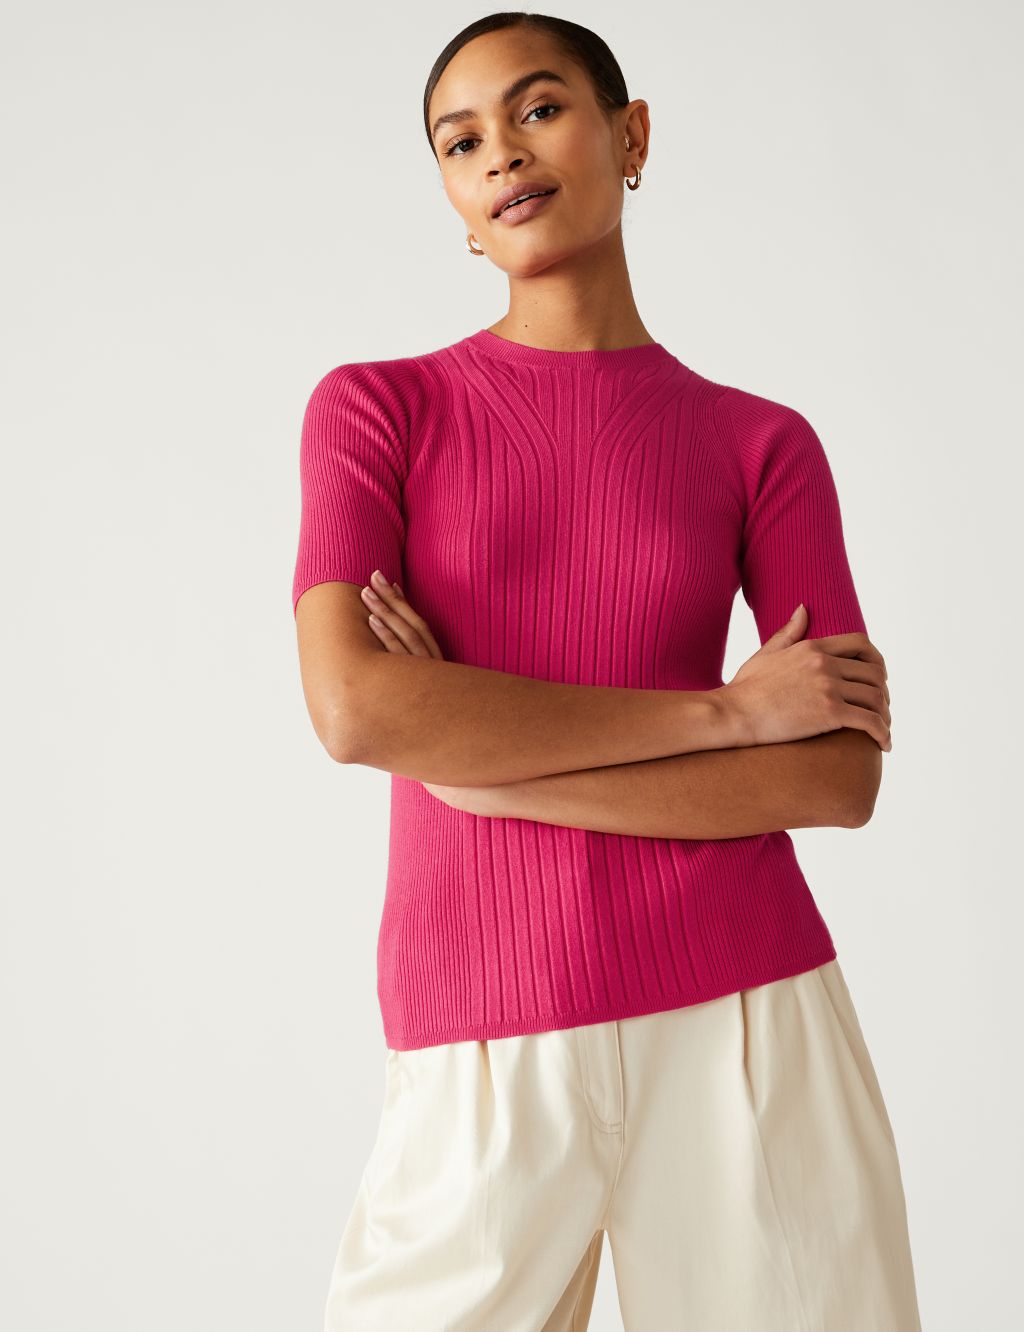 Ribbed Crew Neck Knitted Top image 1